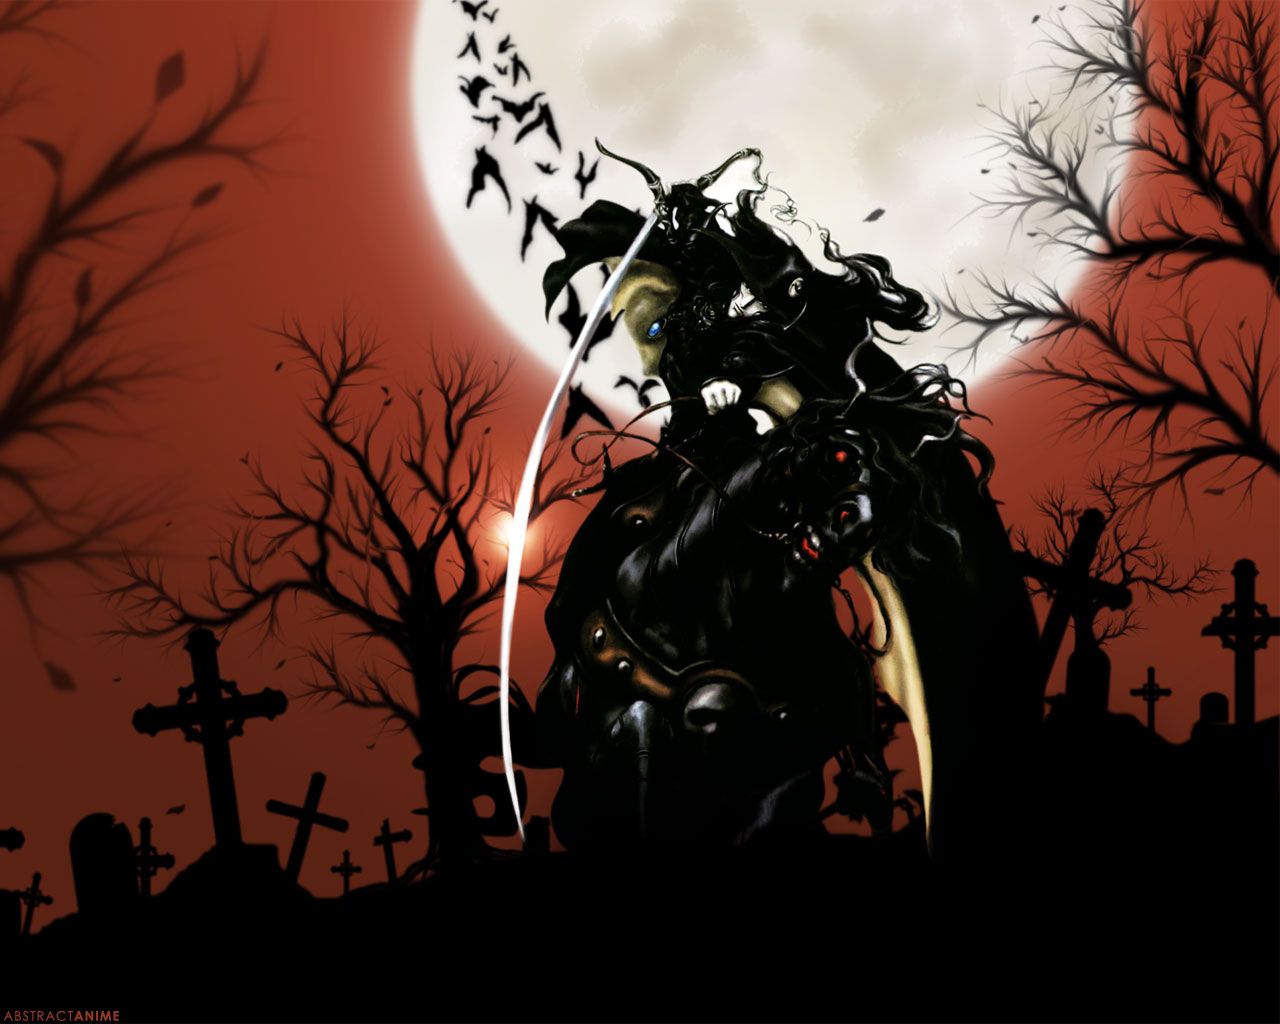 The Post Apocalyptic World Of Vampire Hunter D. Vampire Hunter D, Cool Vampire Wallpaper, Vampire Hunter